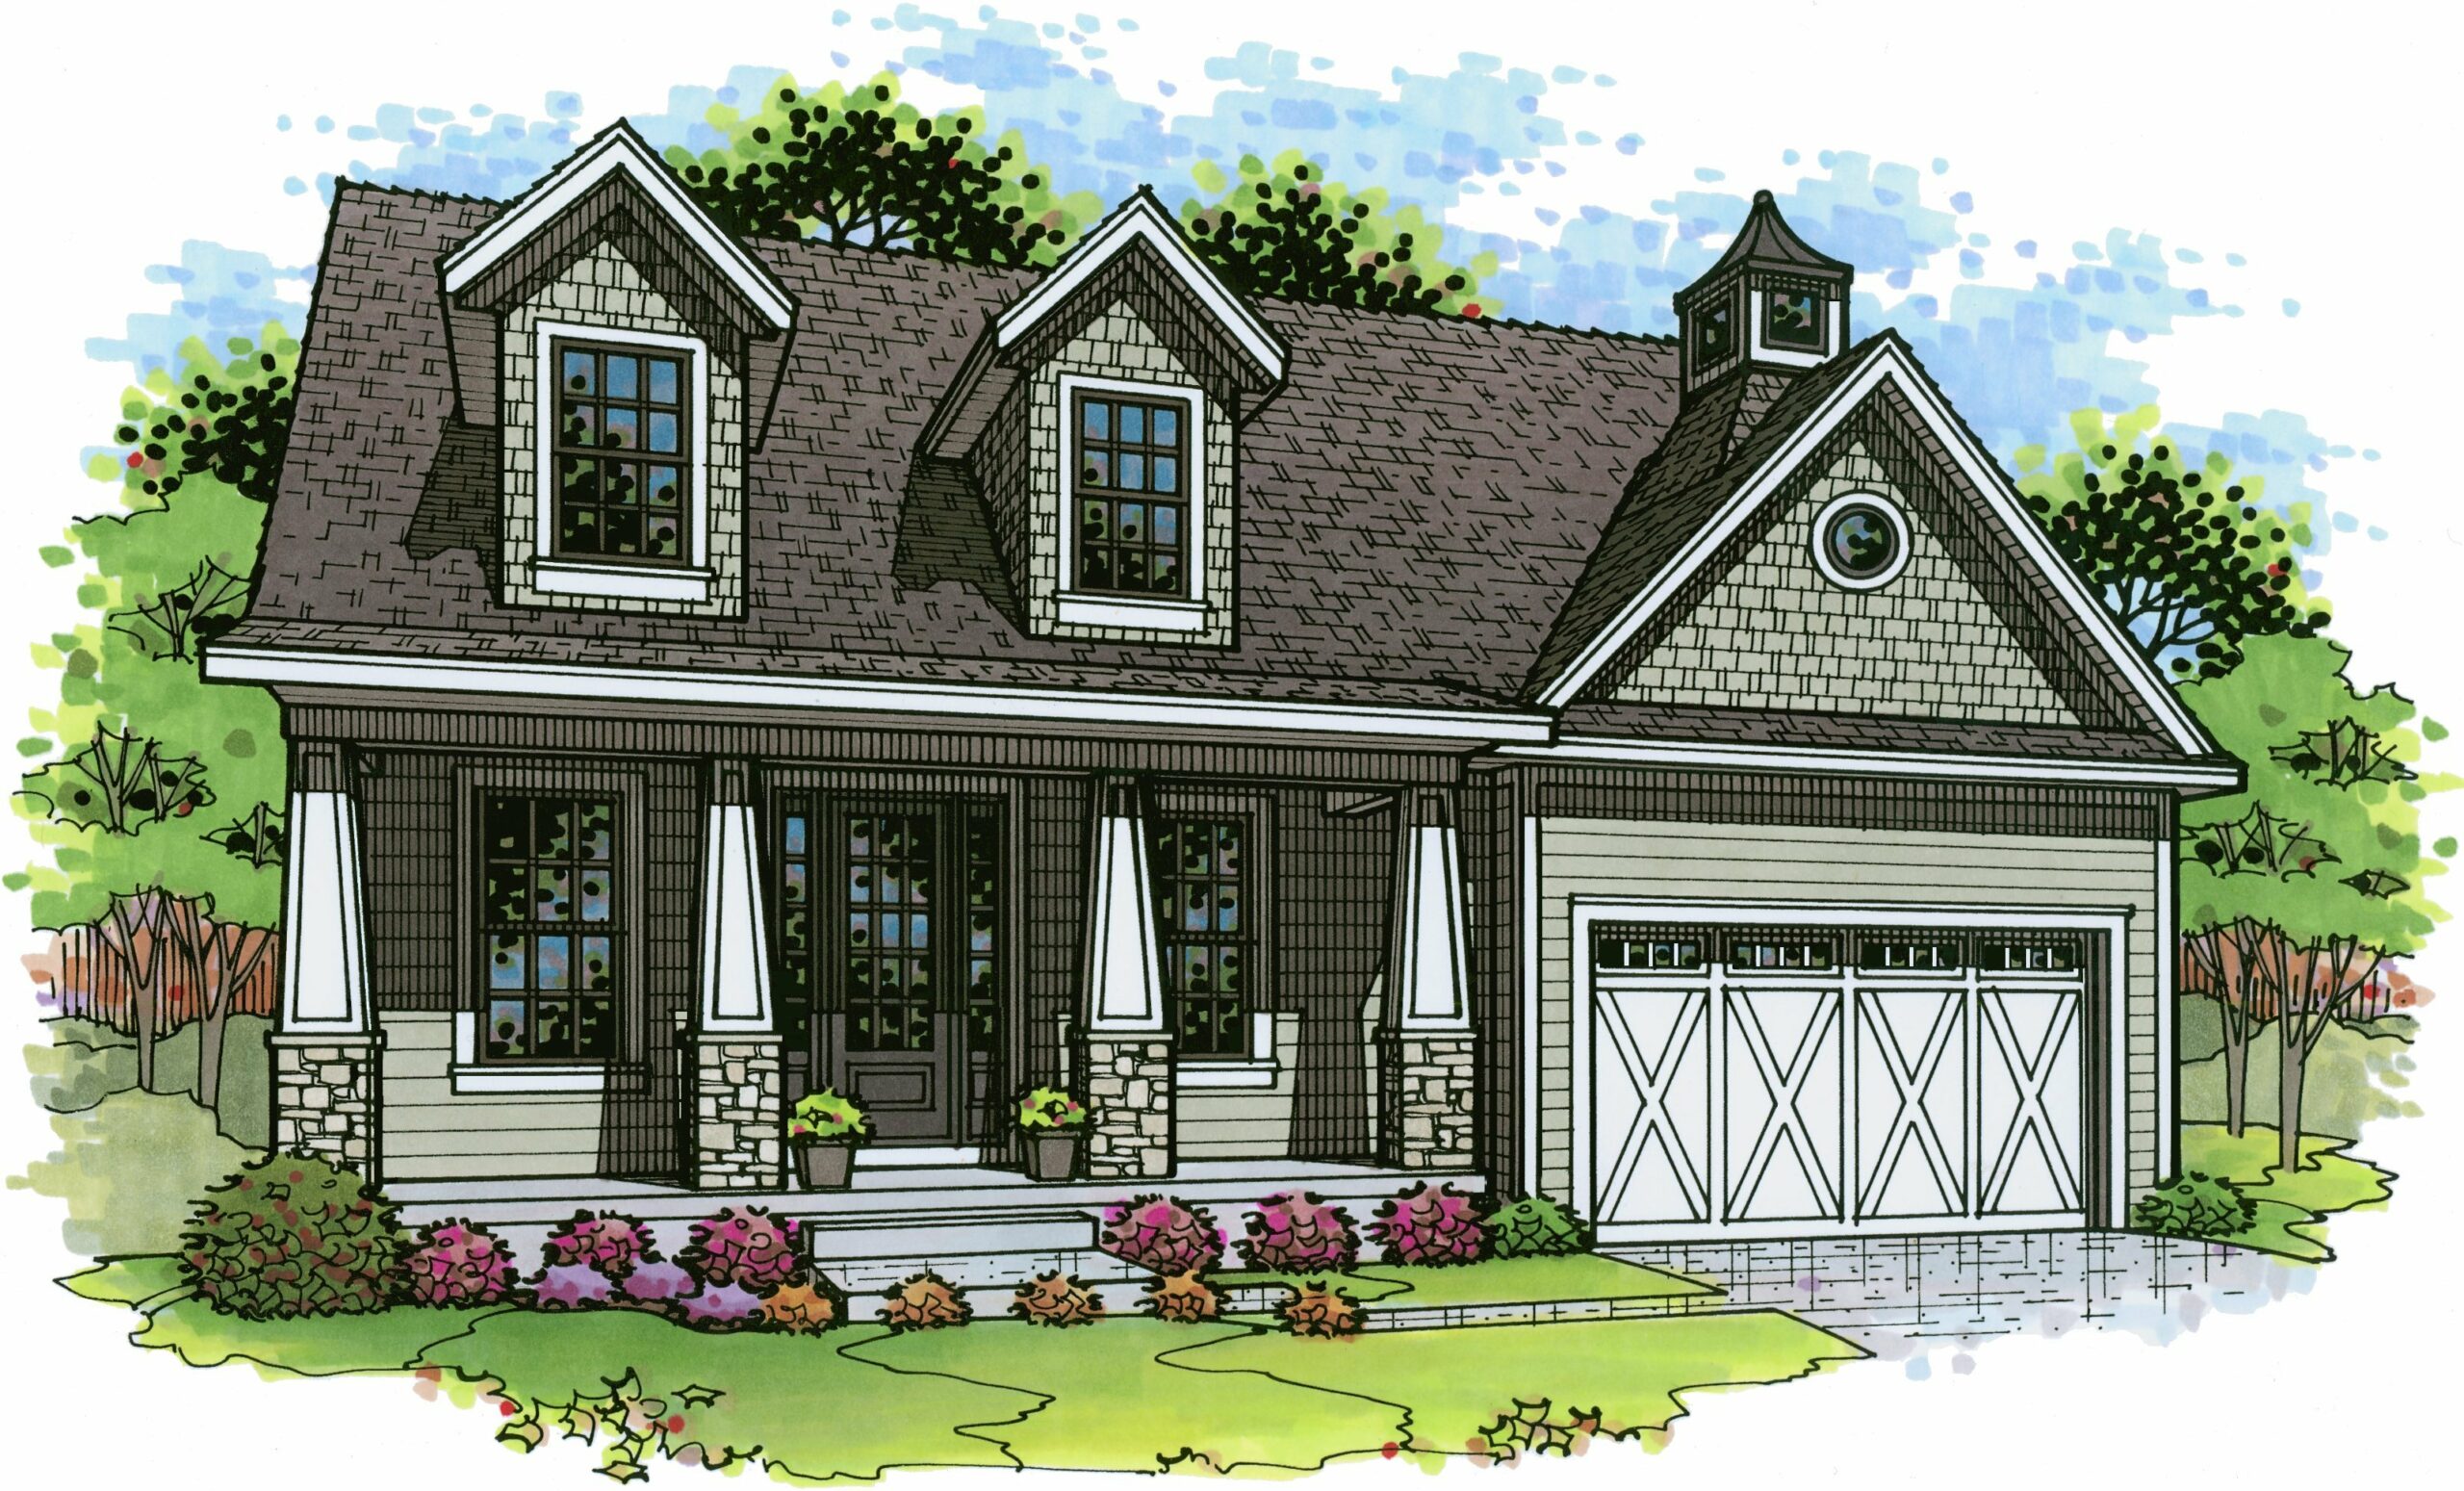 Rendering of the front elevation of the magnolia model from Lambie Homes